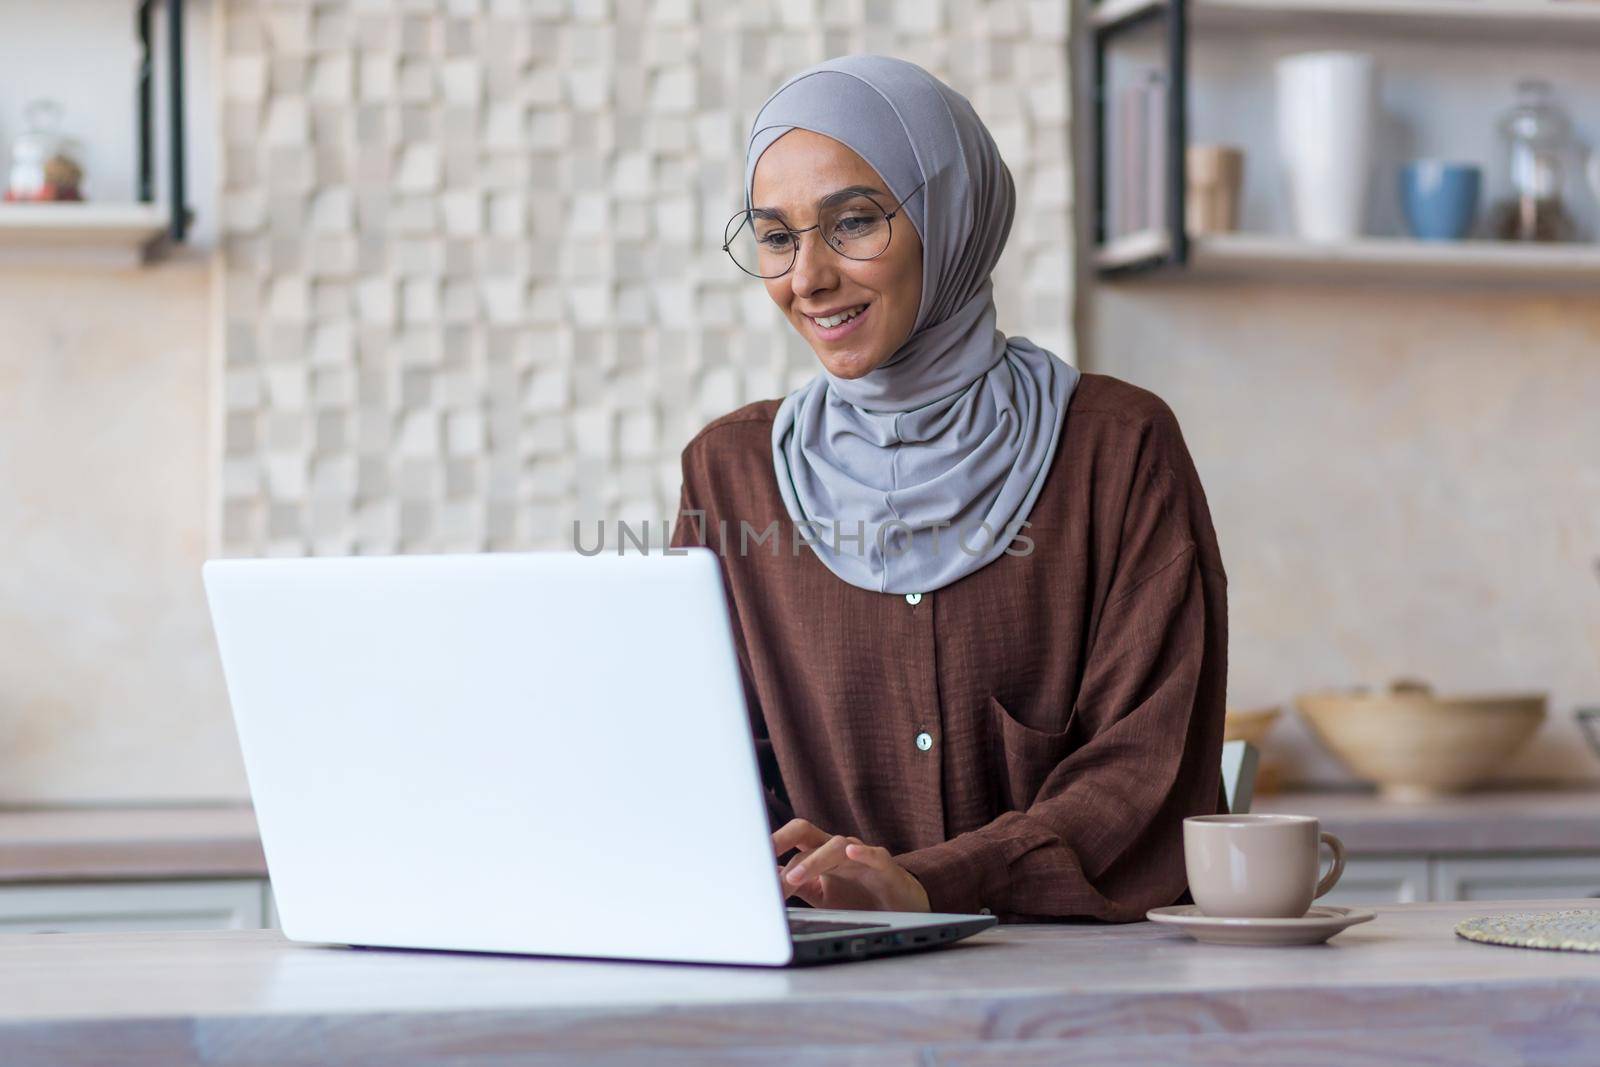 Young beautiful muslim woman in hijab and glasses studying remotely using laptop student woman in kitchen smiling and happy by voronaman